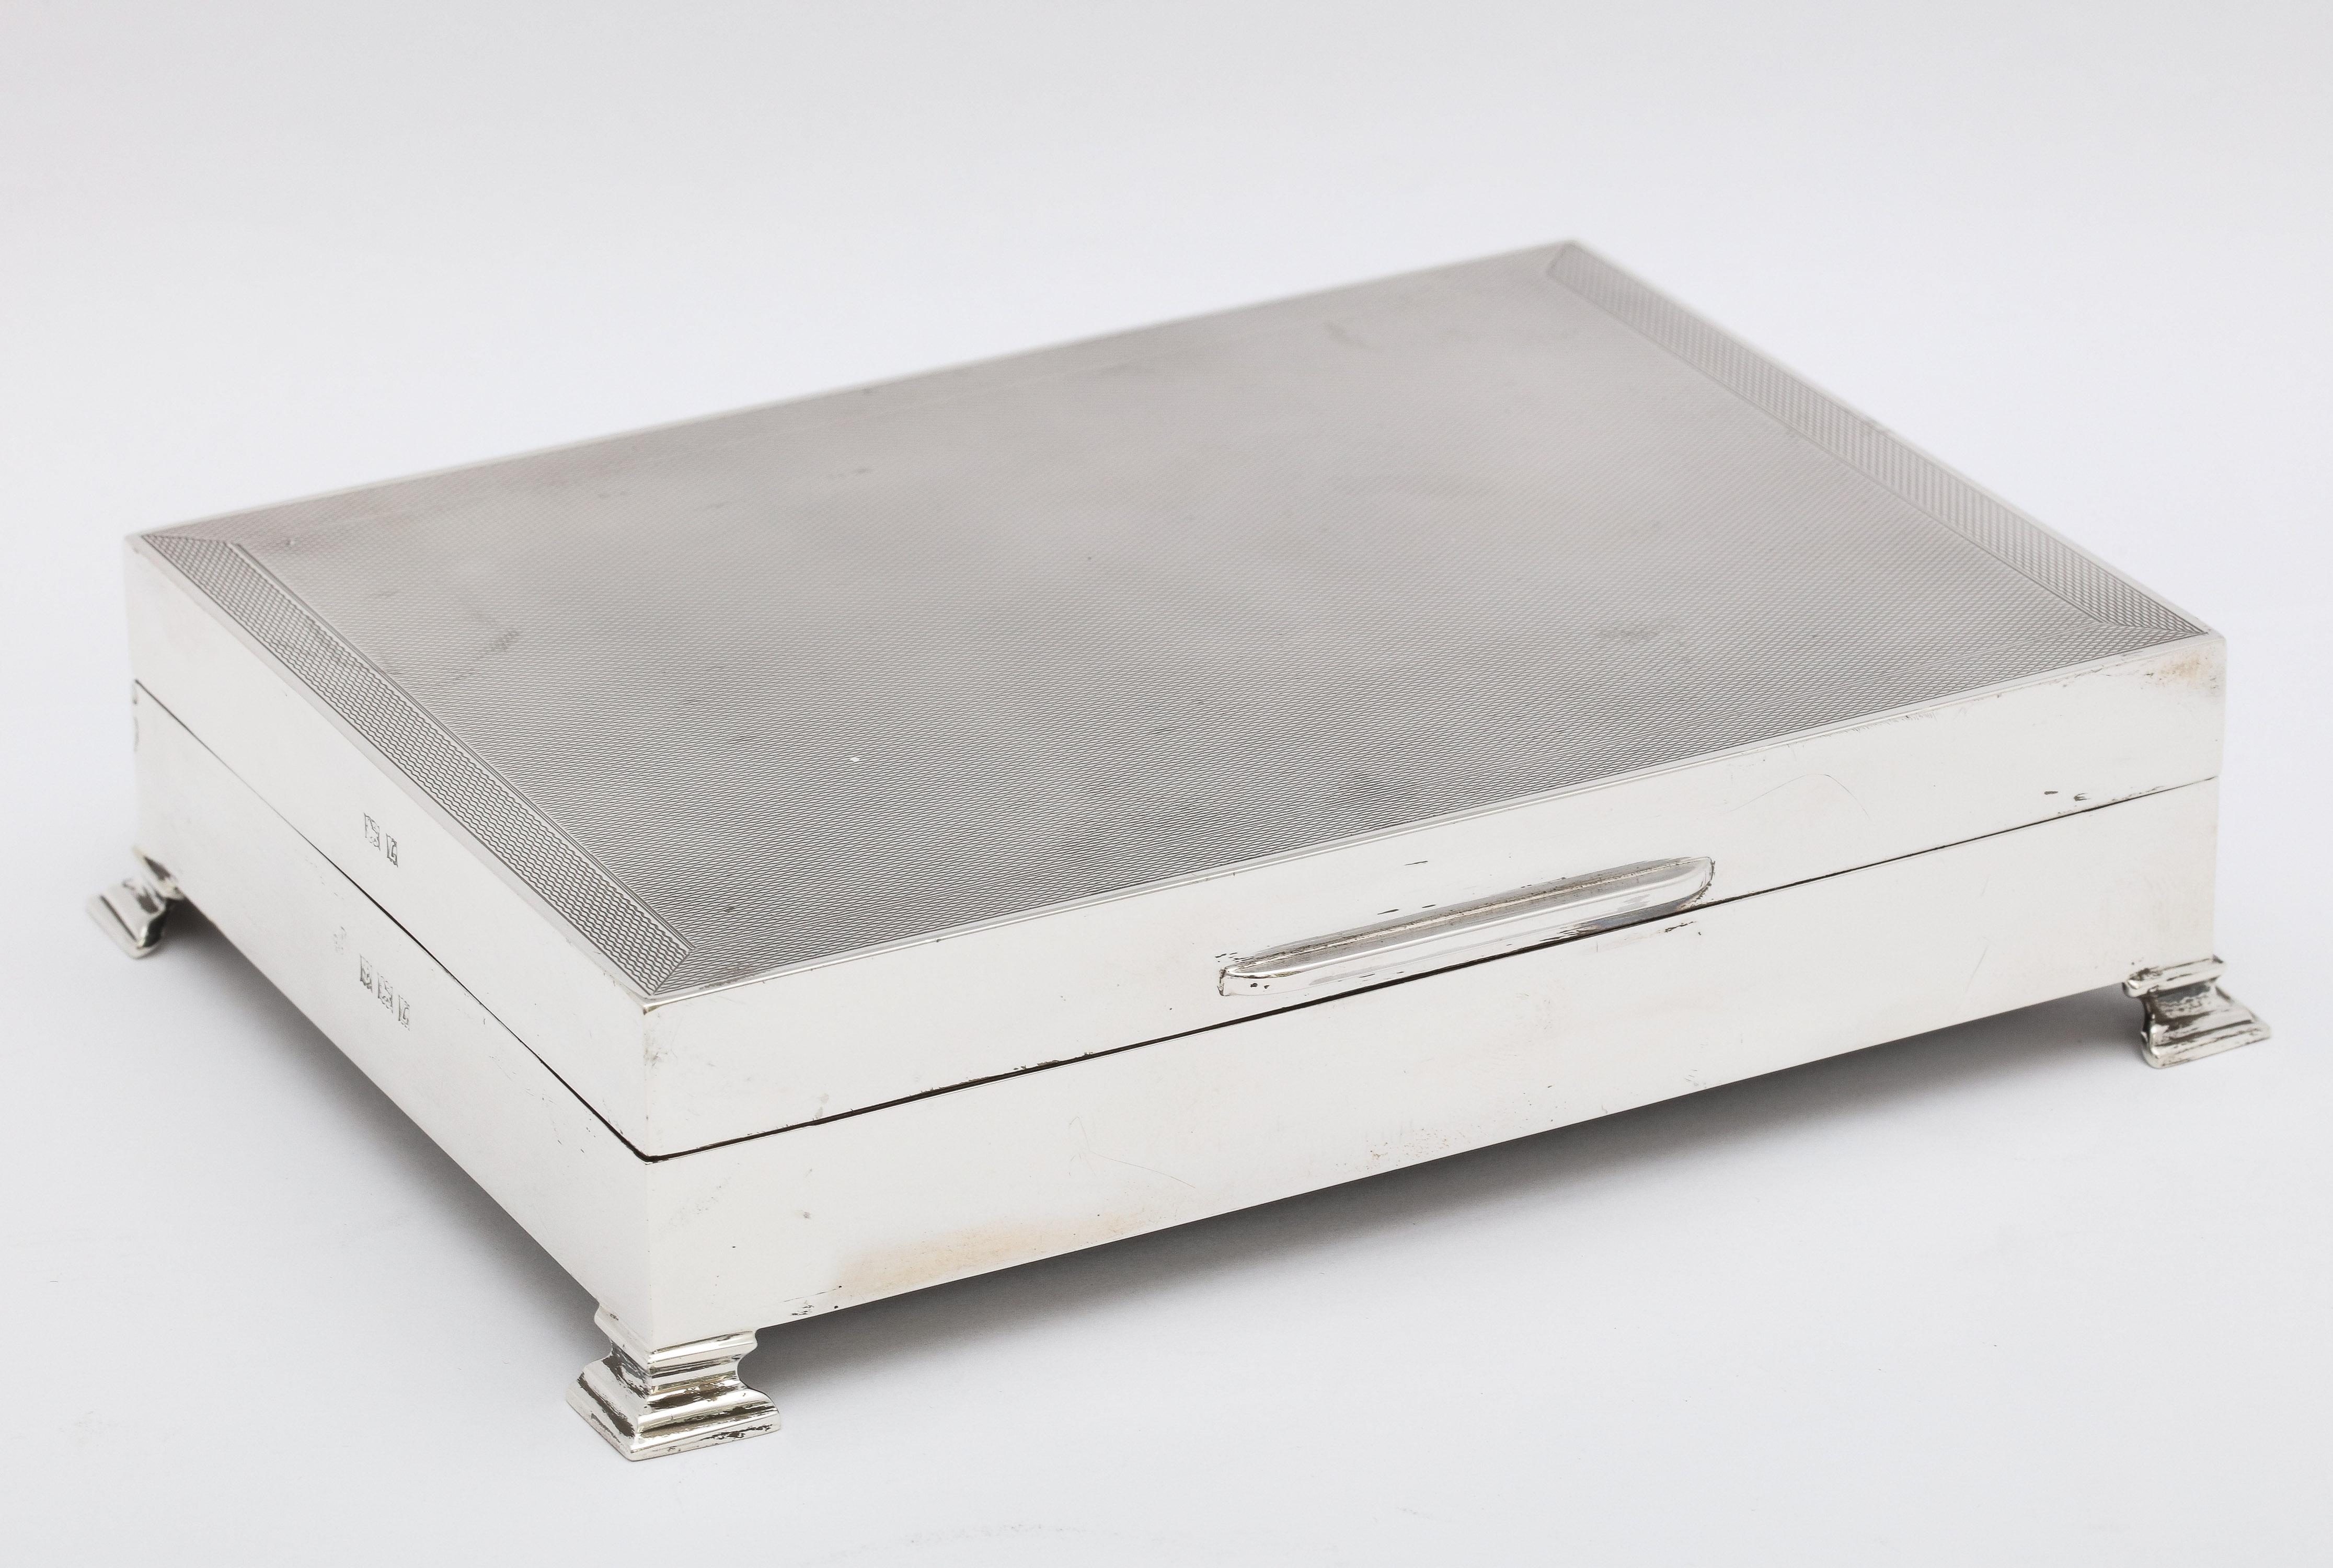 Art Deco style, engine-turned, footed table box with hinged lid, Birmingham, England, year-hallmarked for 1960, Jay Richard Attenborough and Co., Ltd. - makers. Measures 6 1/2 inches wide (from outer edge of foot to outer edge of opposite foot) x 5